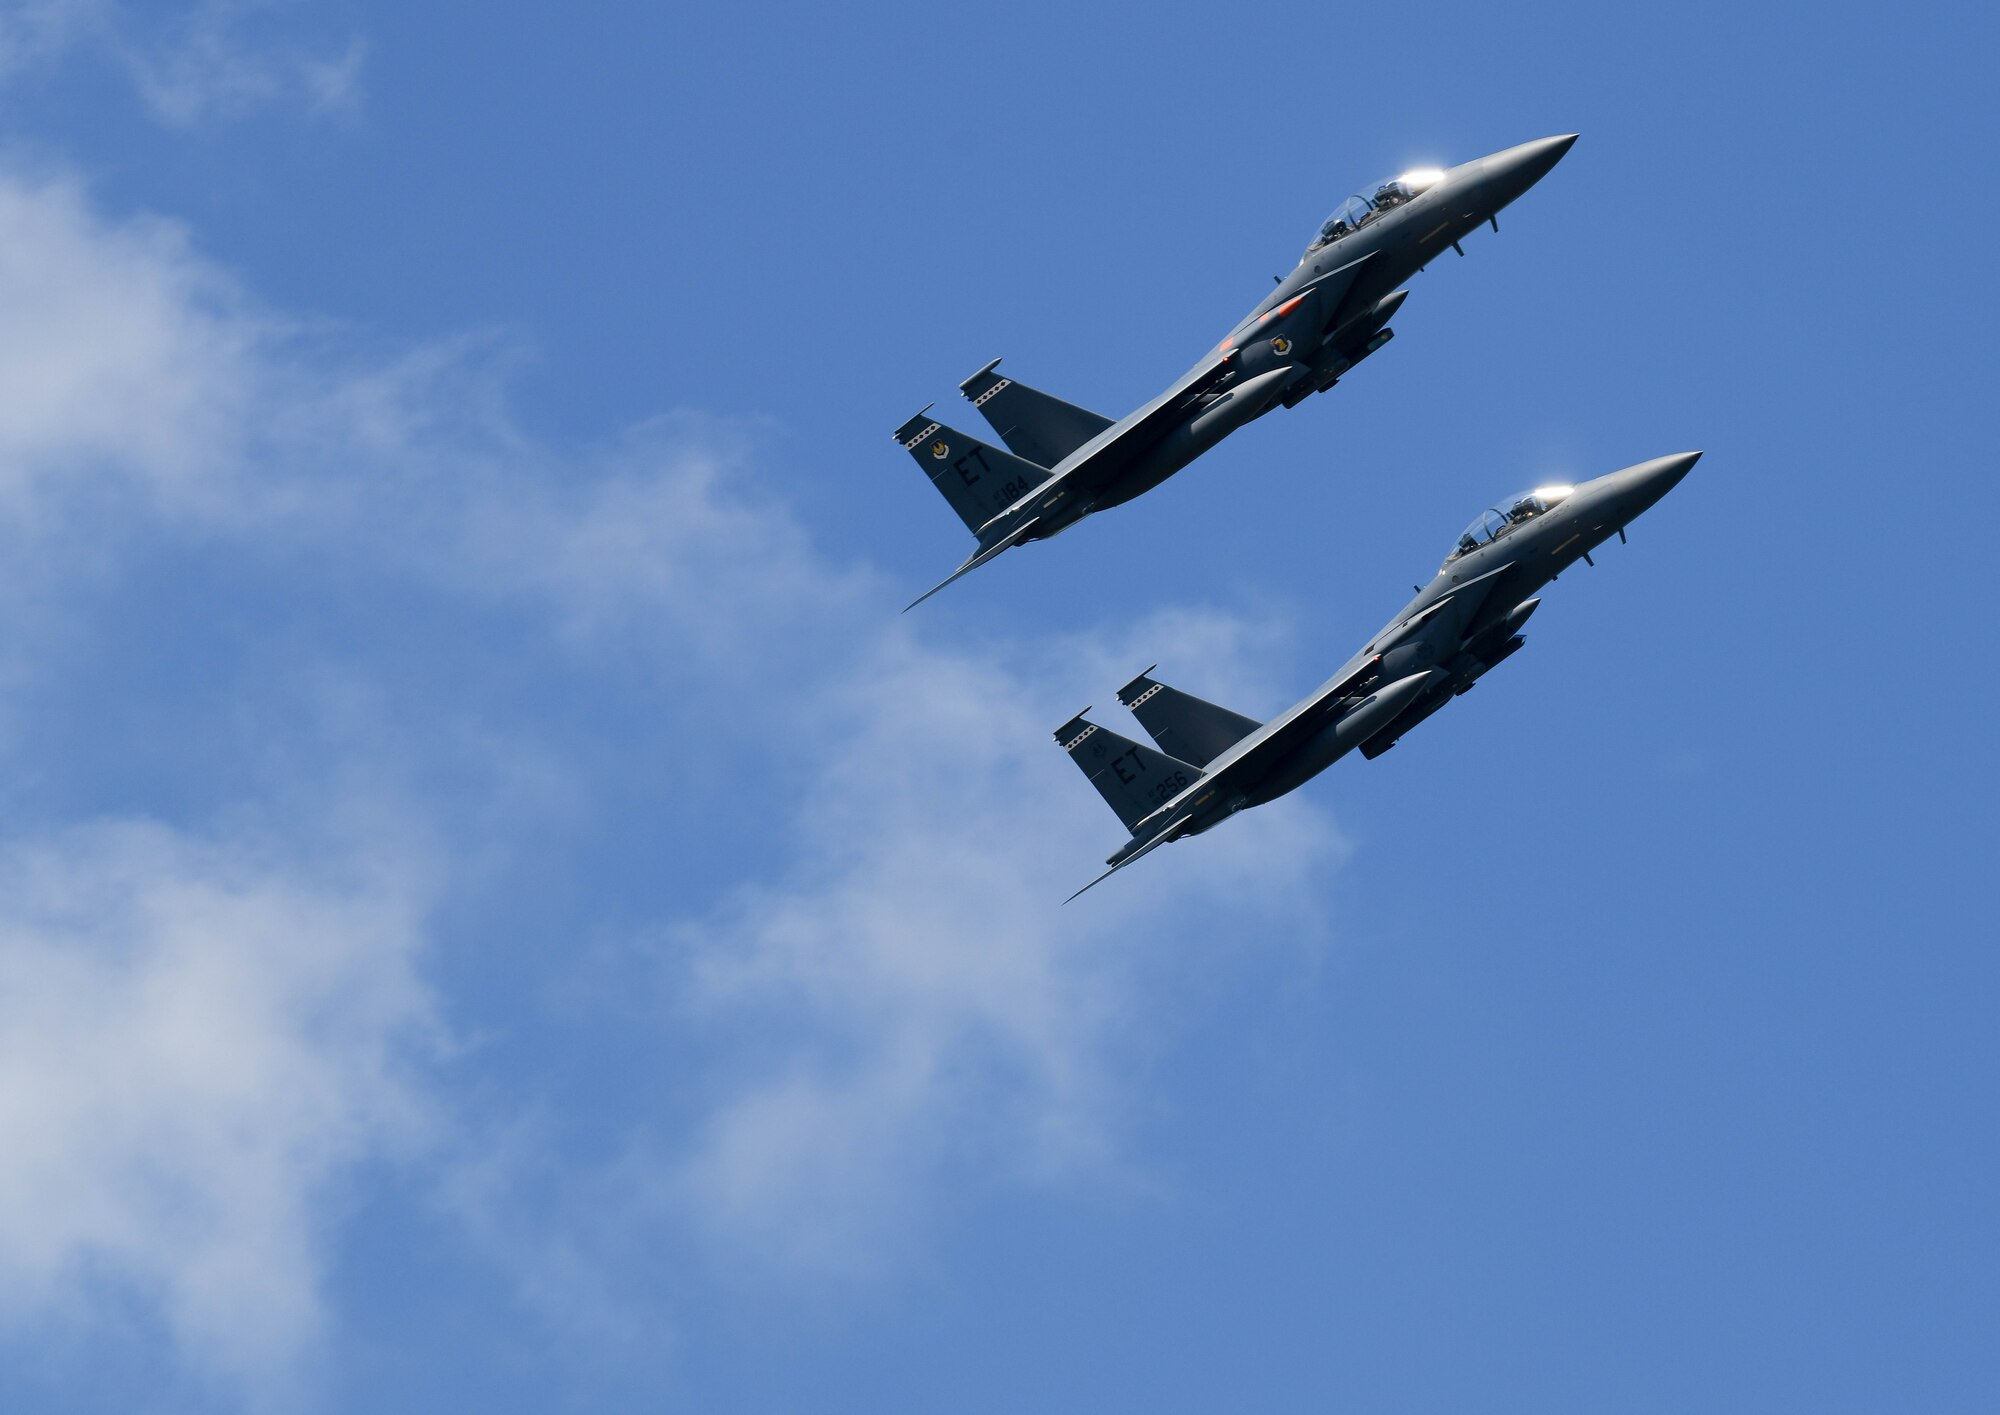 A pair of F-15 Eagles from the 96th Test Wing out of Eglin Air Force Base, Florida, fly over Arnold Air Force Base during a retreat ceremony after the Arnold Engineering Development Complex “Hap Arnold Day” 70th Anniversary Celebration Open House, June 26, 2021, at Arnold AFB, Tenn. (U.S. Air Force photo by Jill Pickett)